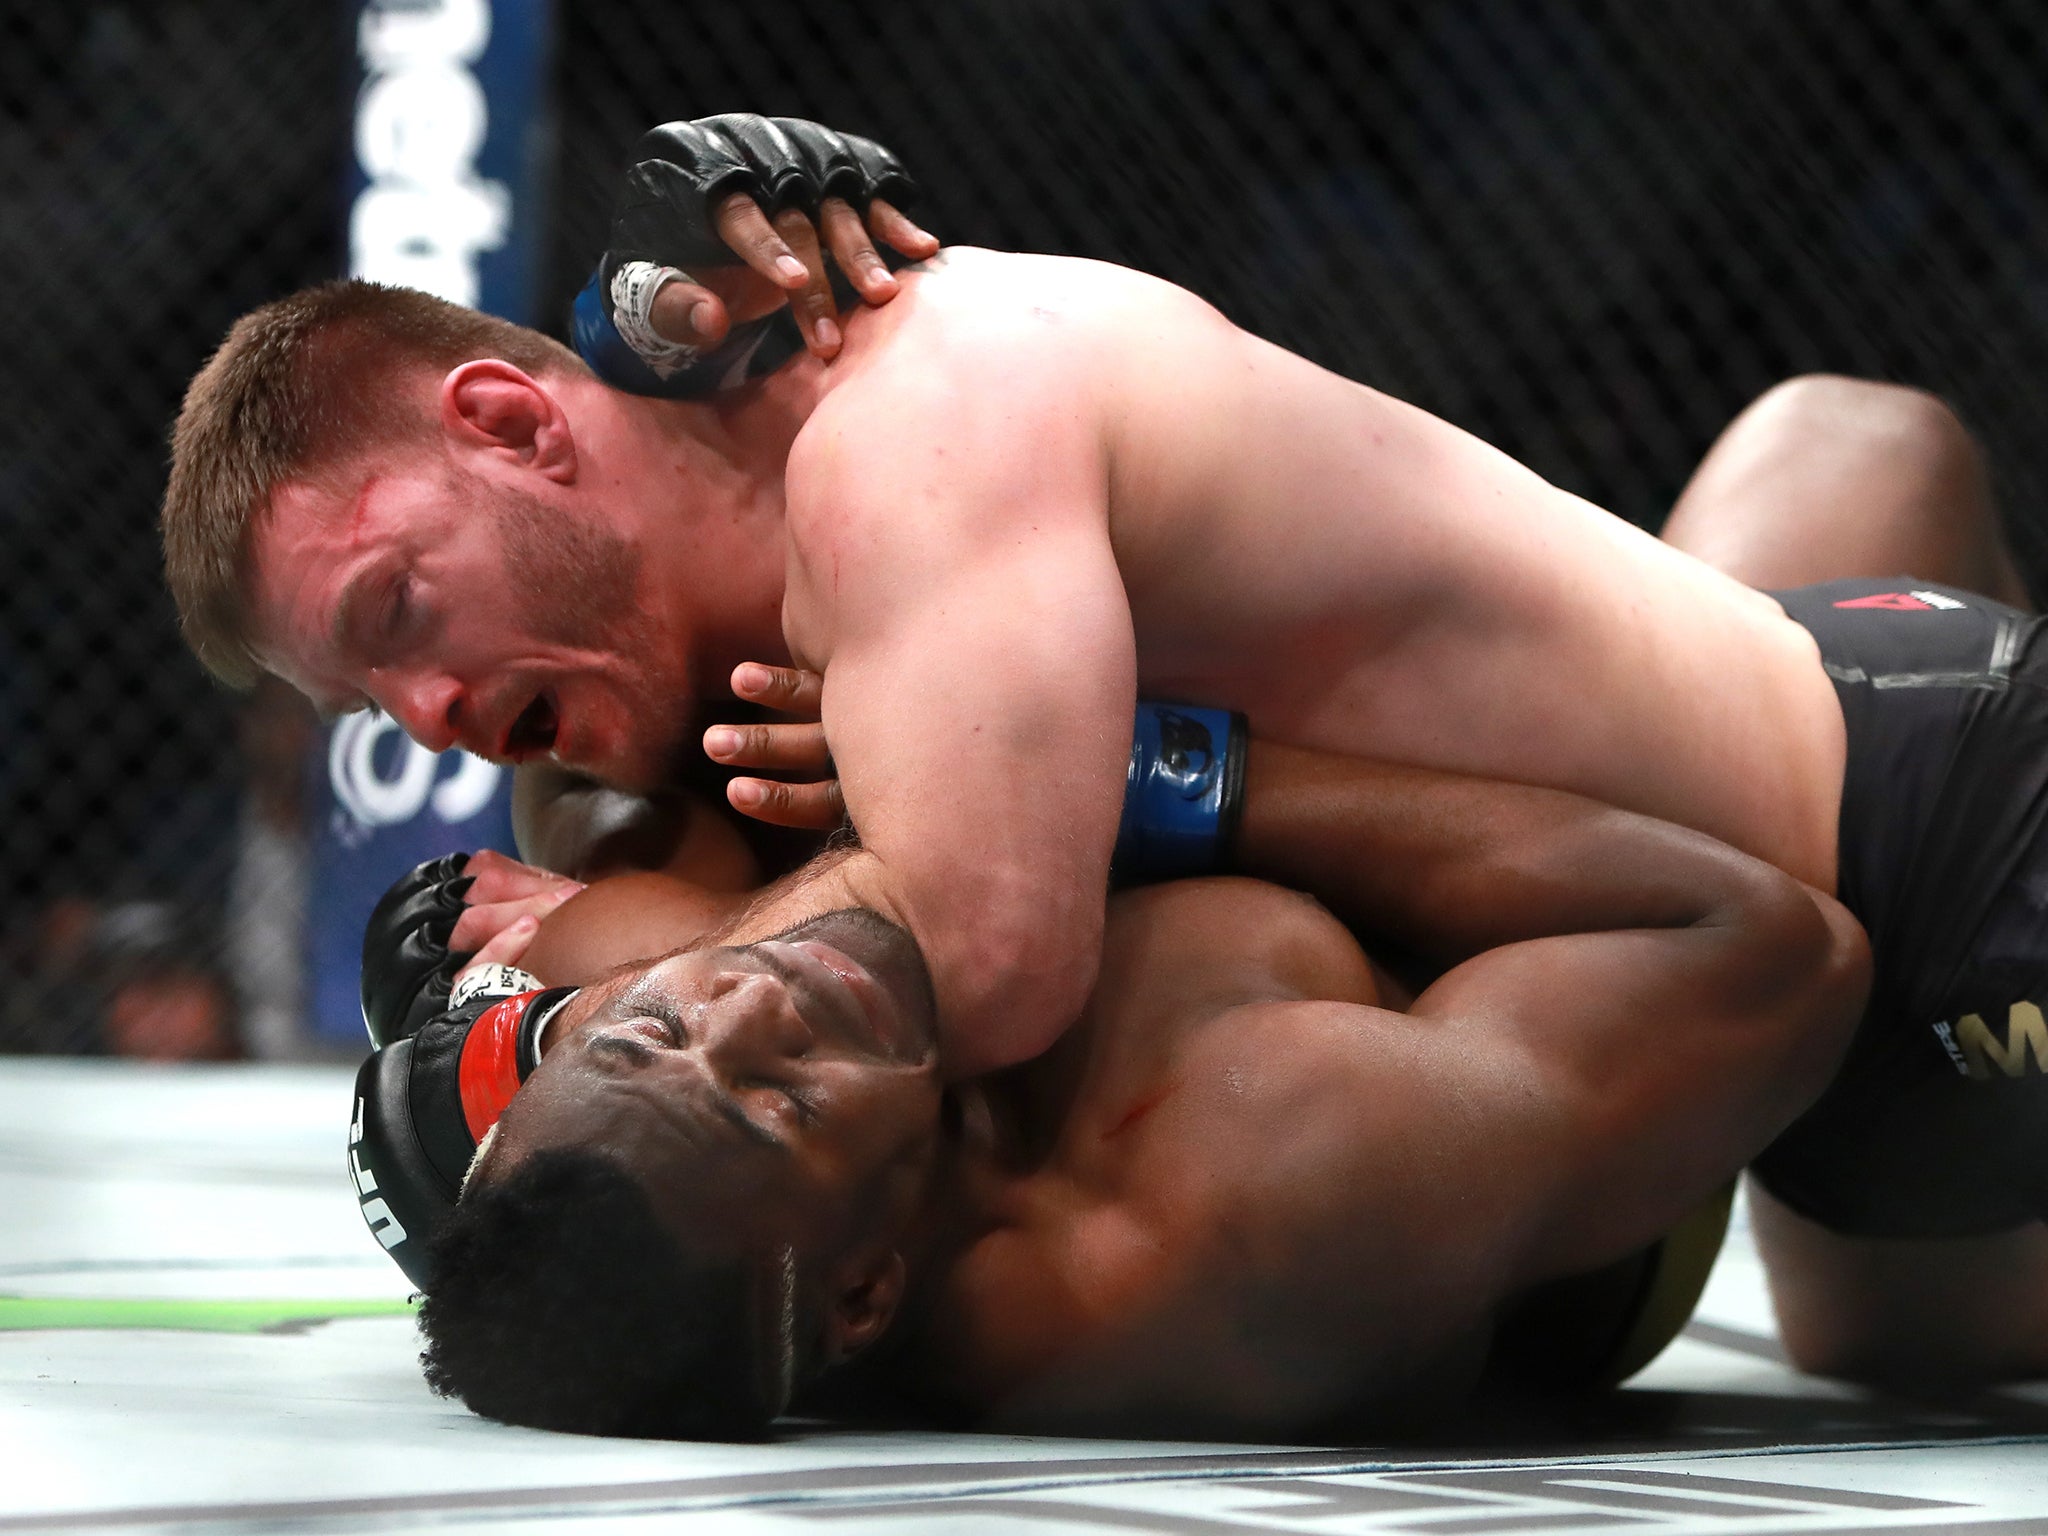 Miocic was able to ground Ngannou at will and control the fight from the floor